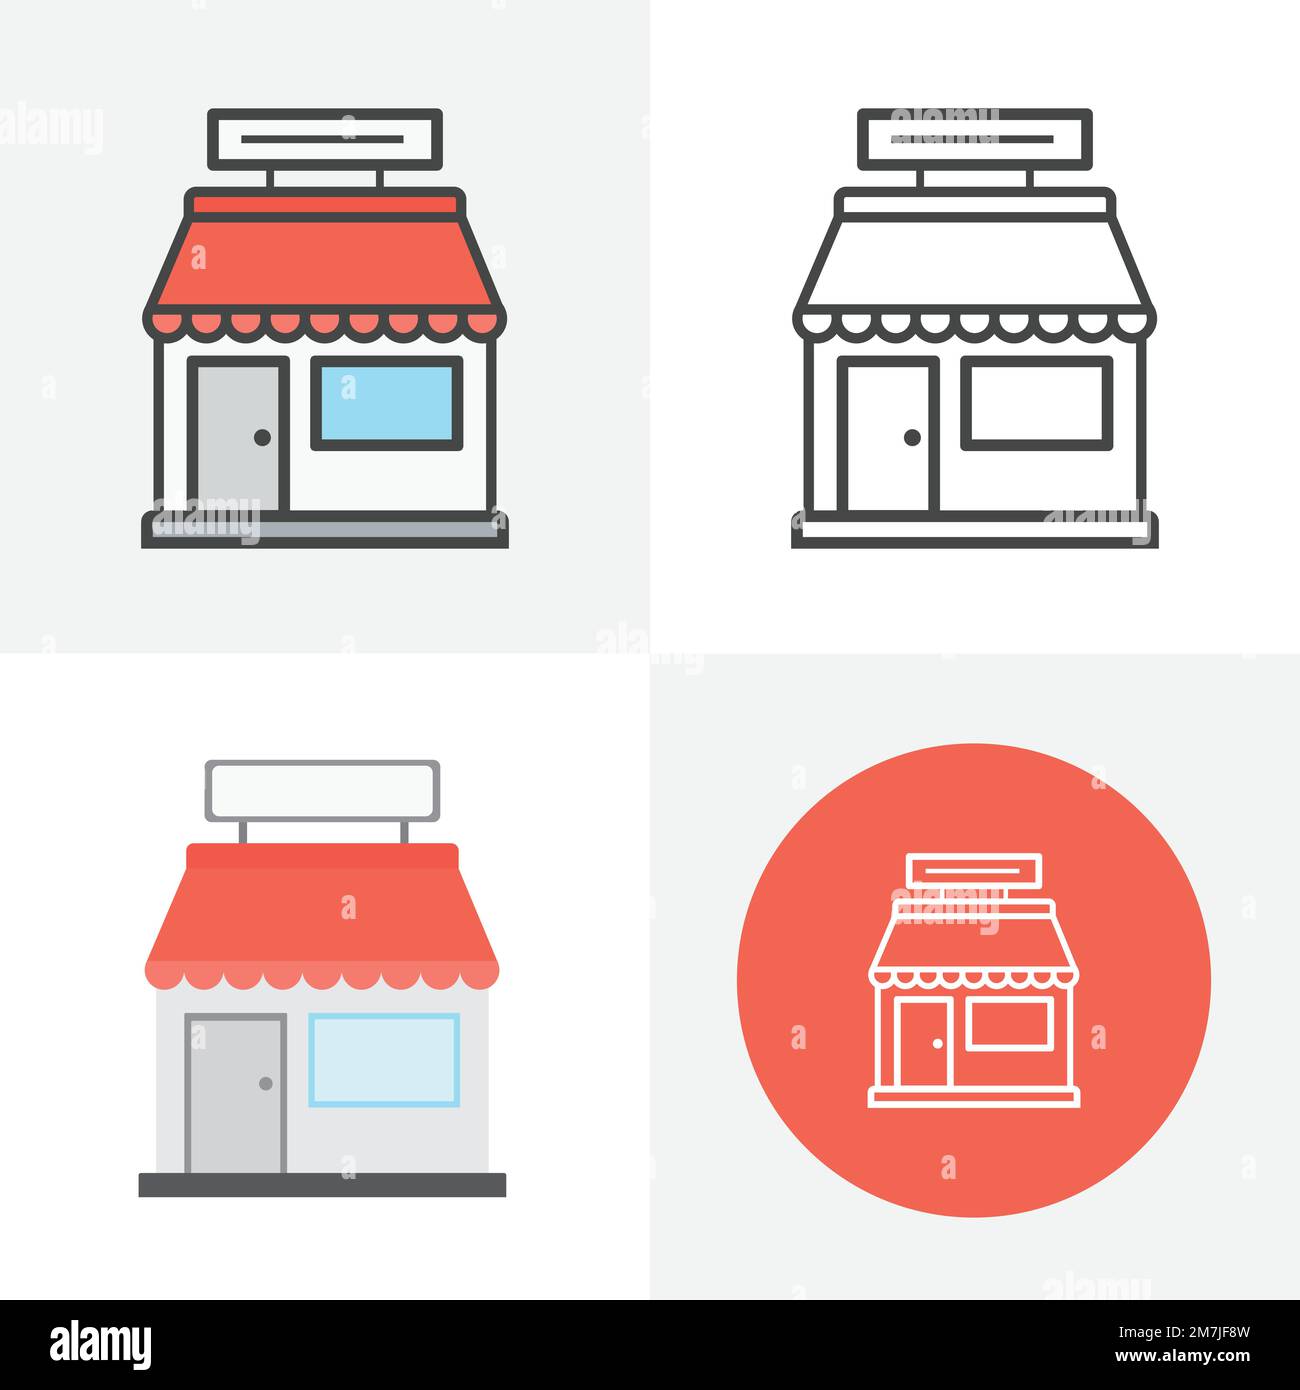 Store icon, colored outline icon of a store, warehouse. Symbol and logo illustration for commercial store. Vector icon. Stock Vector